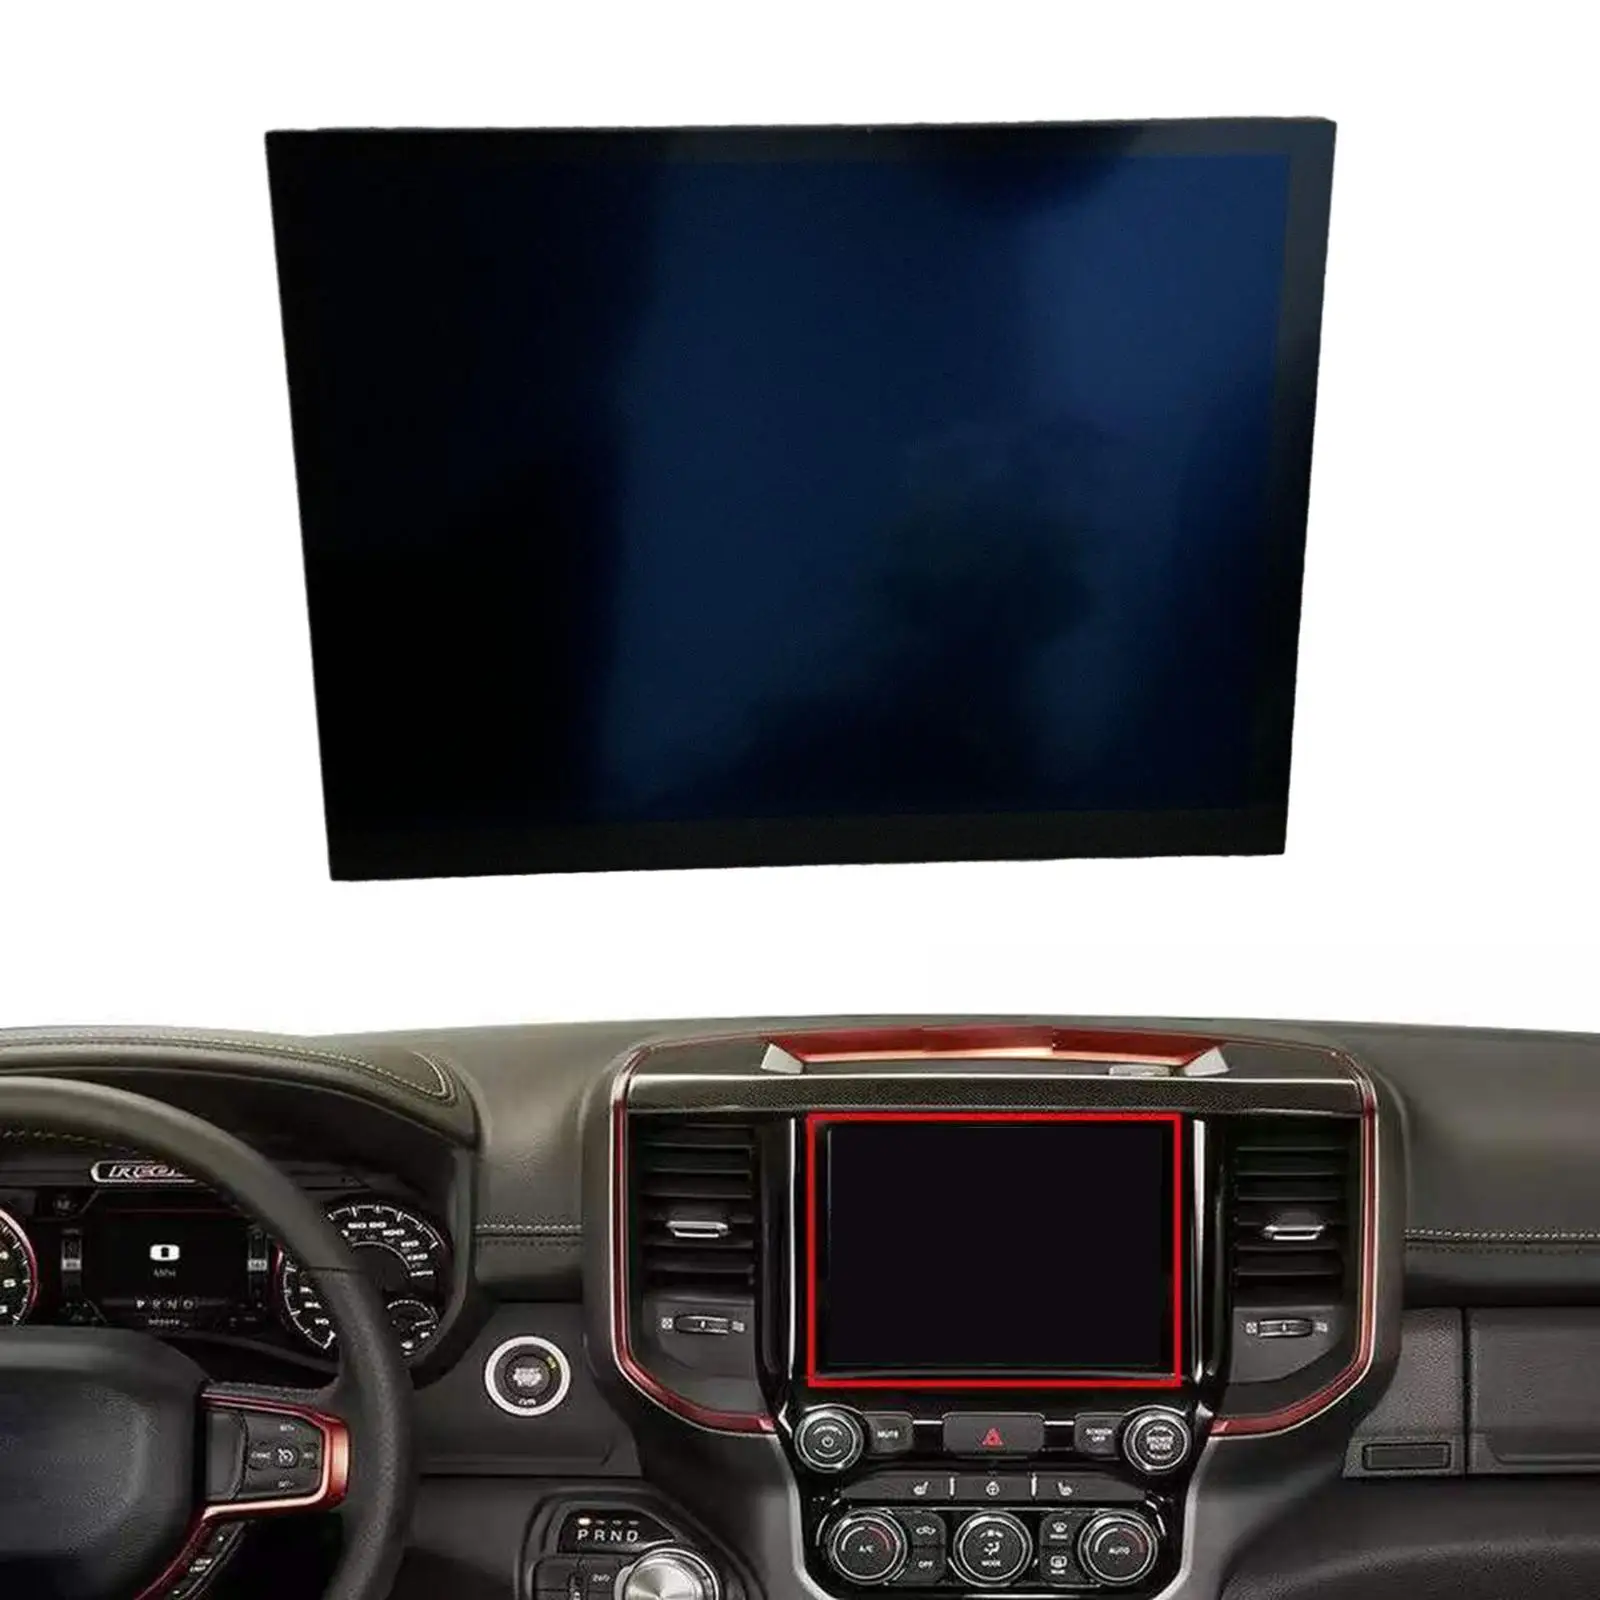 Navigation System LCD Spare Parts High Performance LA084x01(SL)(02) Monitor Touch Screen 8.4